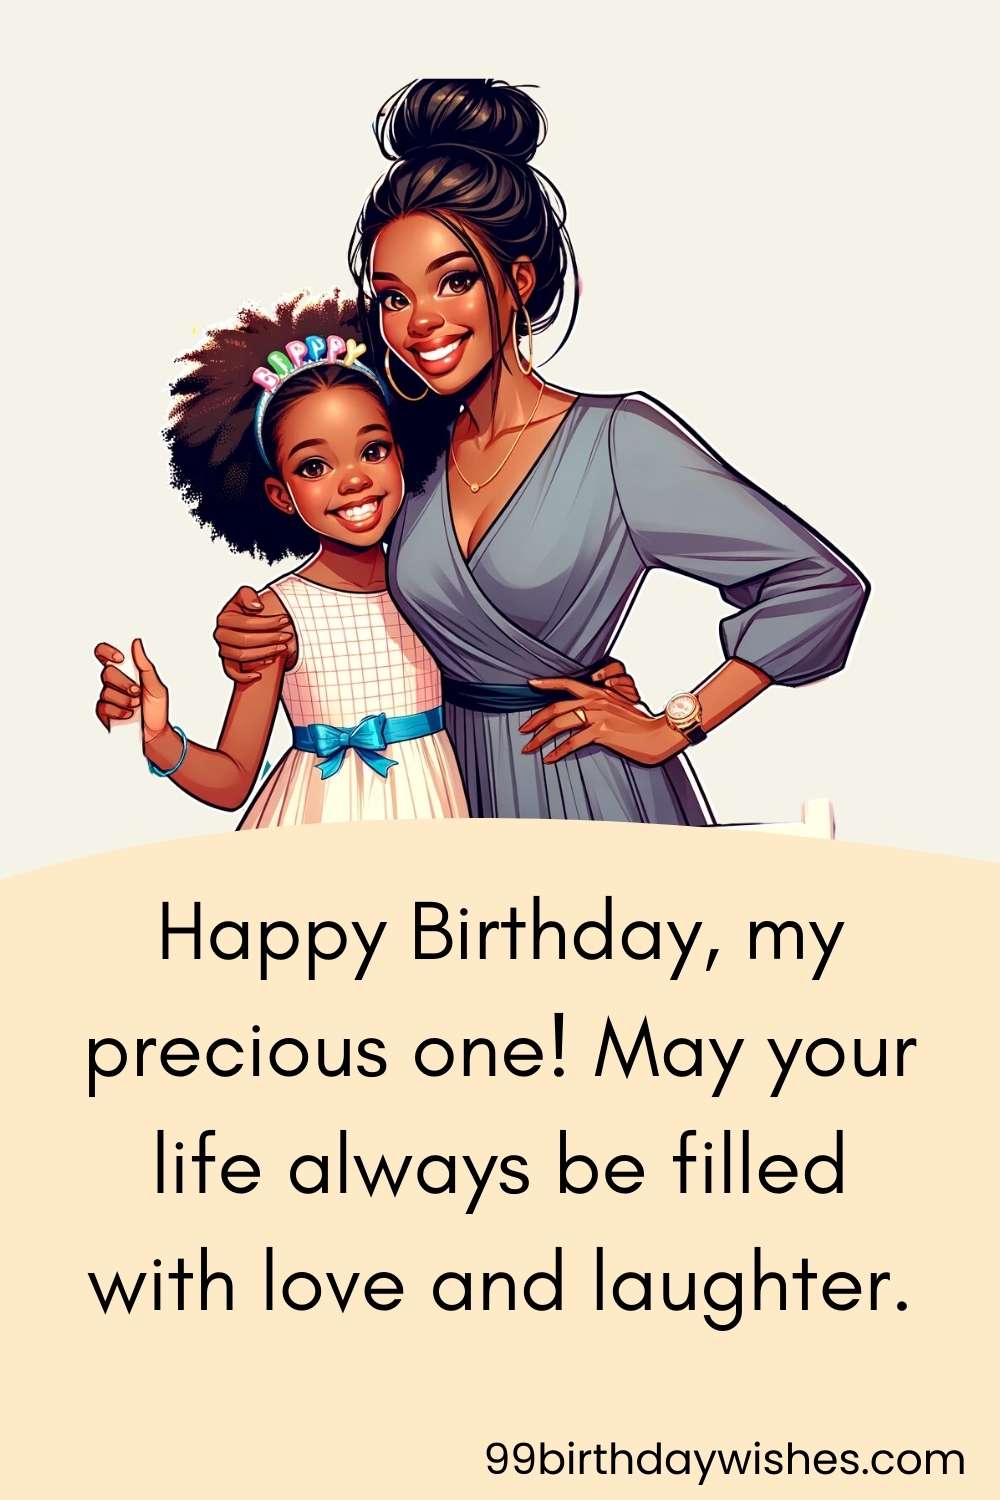 Happy Birthdays Wishes for Daughter from Mom